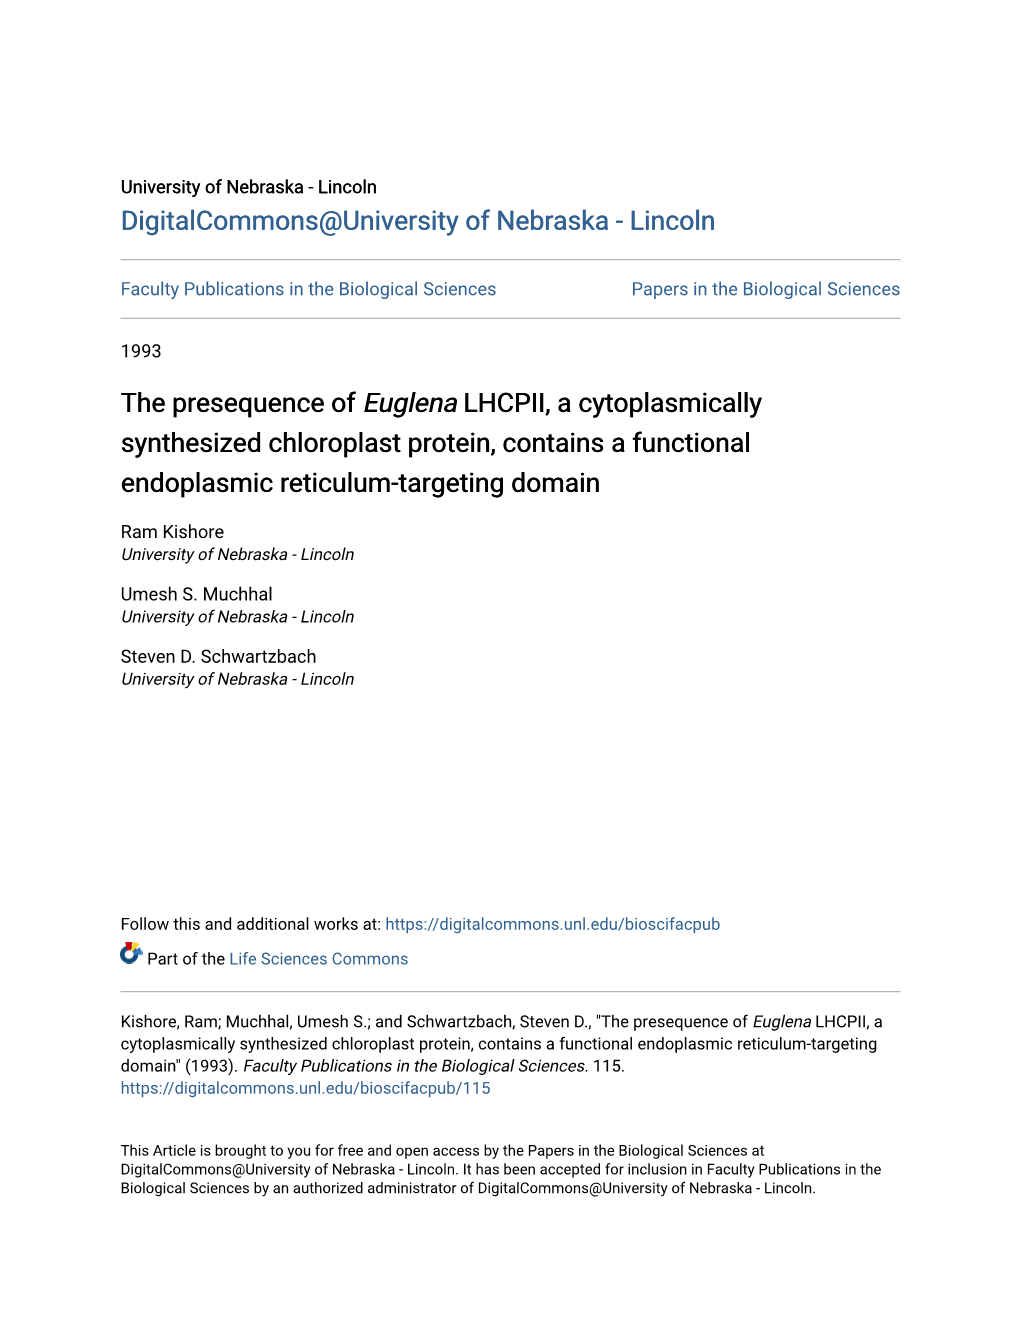 The Presequence of Euglena LHCPII, a Cytoplasmically Synthesized Chloroplast Protein, Contains a Functional Endoplasmic Reticulum-Targeting Domain